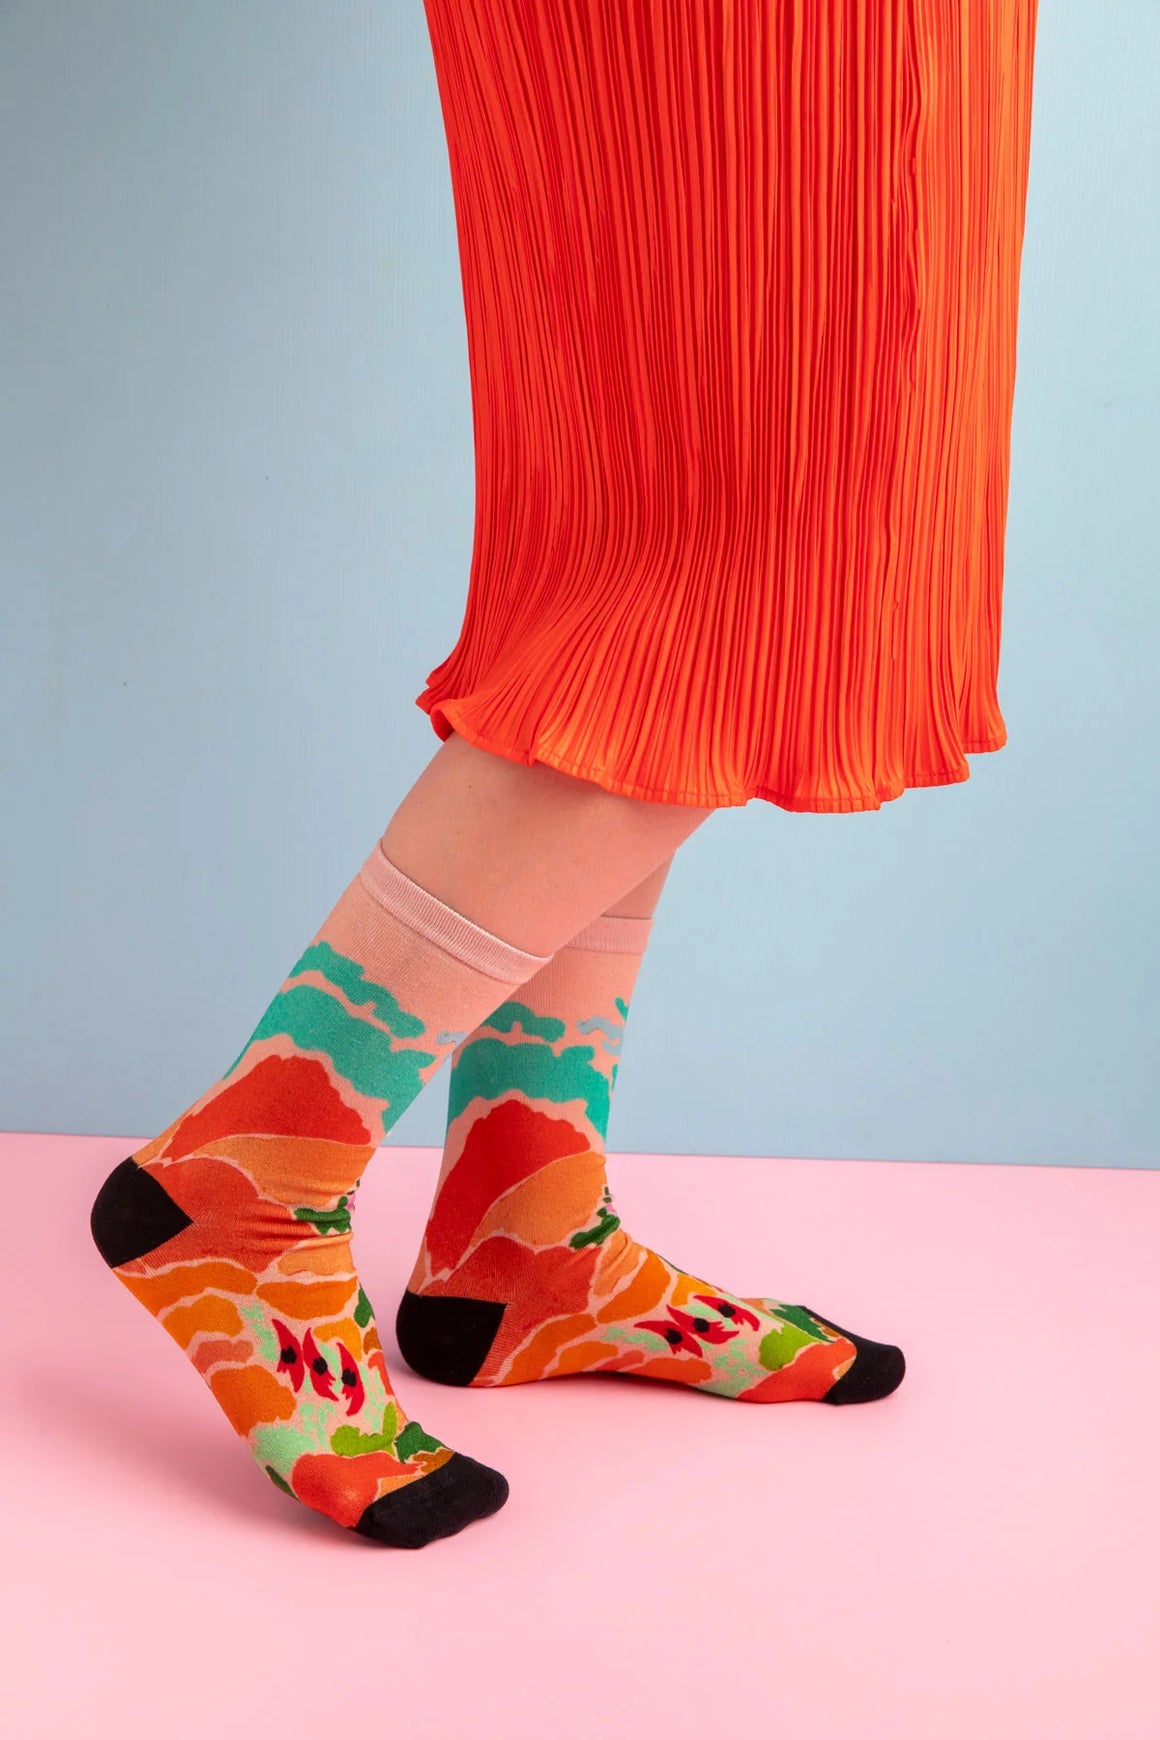 Rainbow outback socks by Julie White Featuring original hand drawn 'RAINBOW OUTBACK‘ print - Painted while dreaming of rocky landscapes in the Australian outback